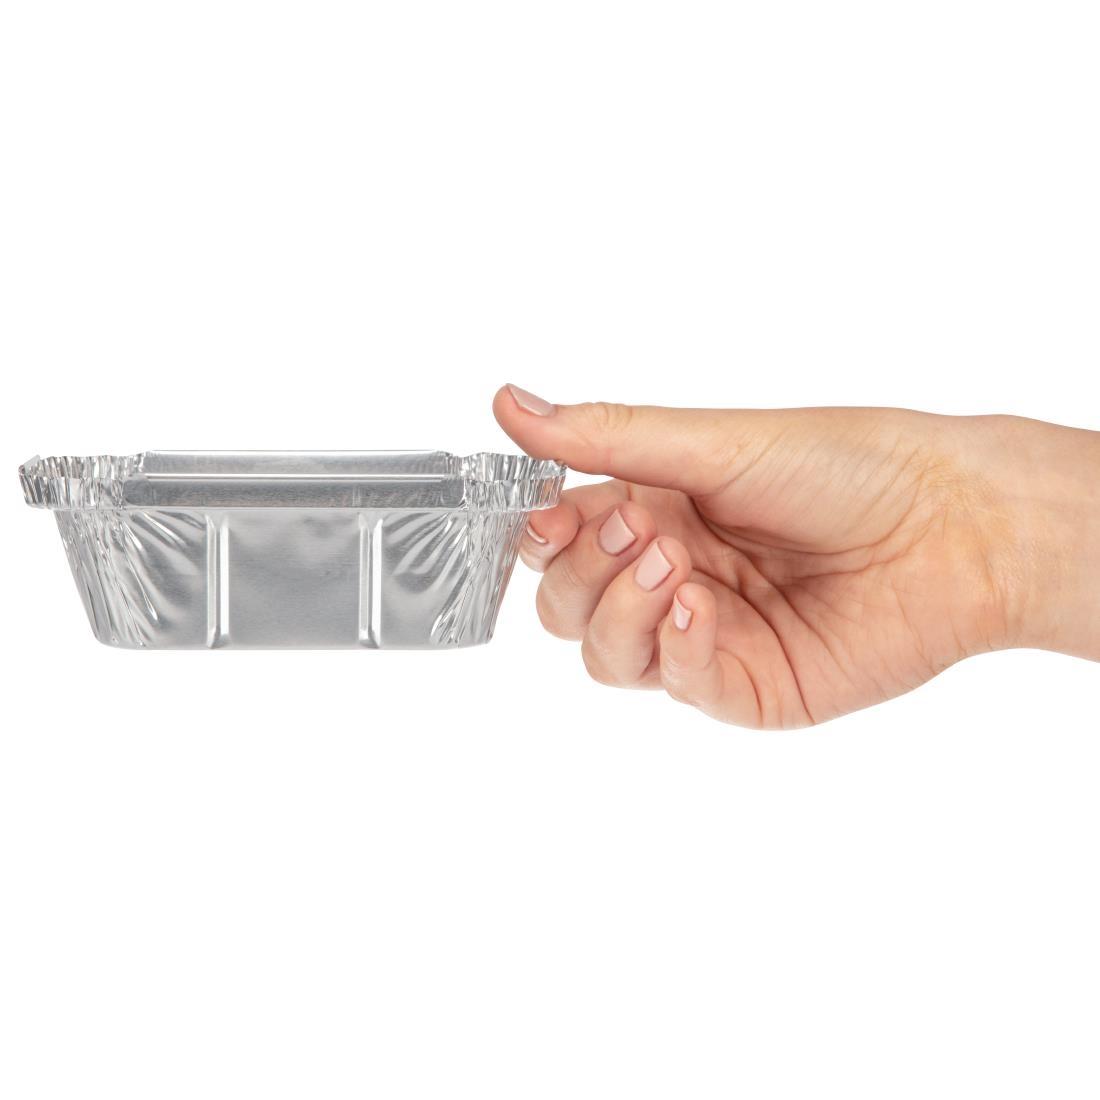 Fiesta Recyclable Foil Containers Small 260ml / 9oz (Pack of 1000) - CD947  - 4